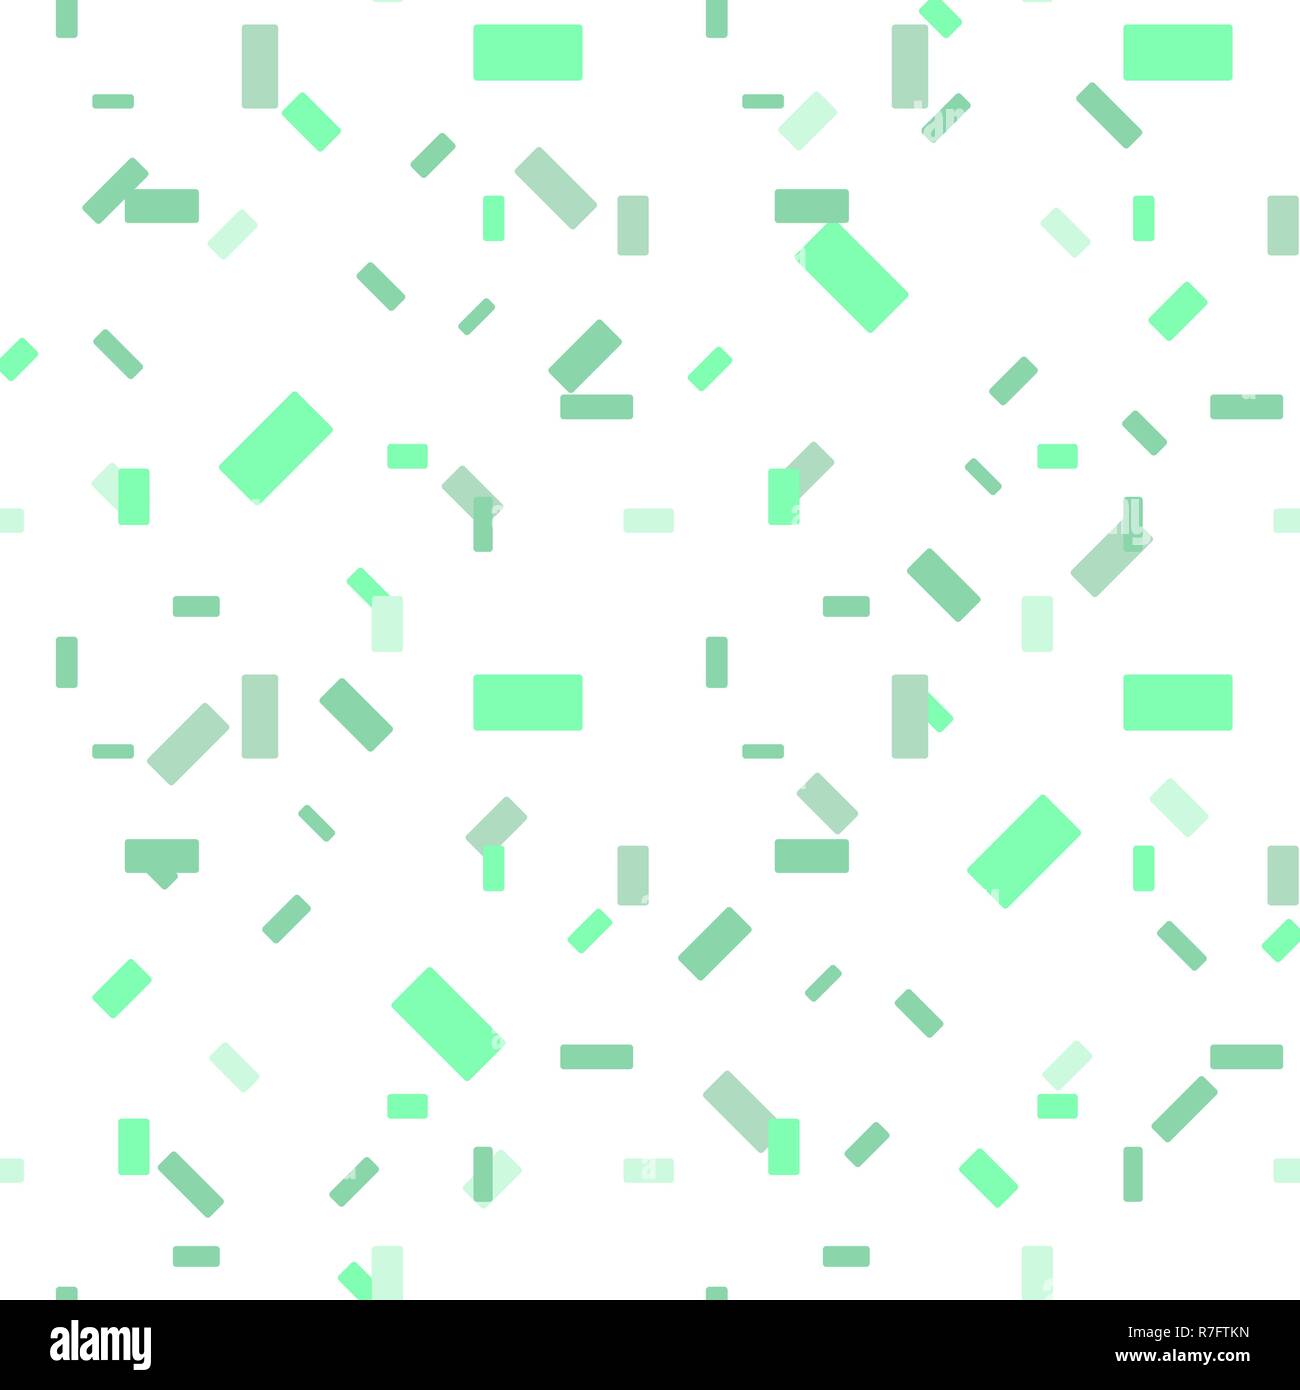 Light Green vector seamless texture in rectangular style. gradient illustration with rectangles. background with many falling tiny confetti pieces. Fo Stock Vector